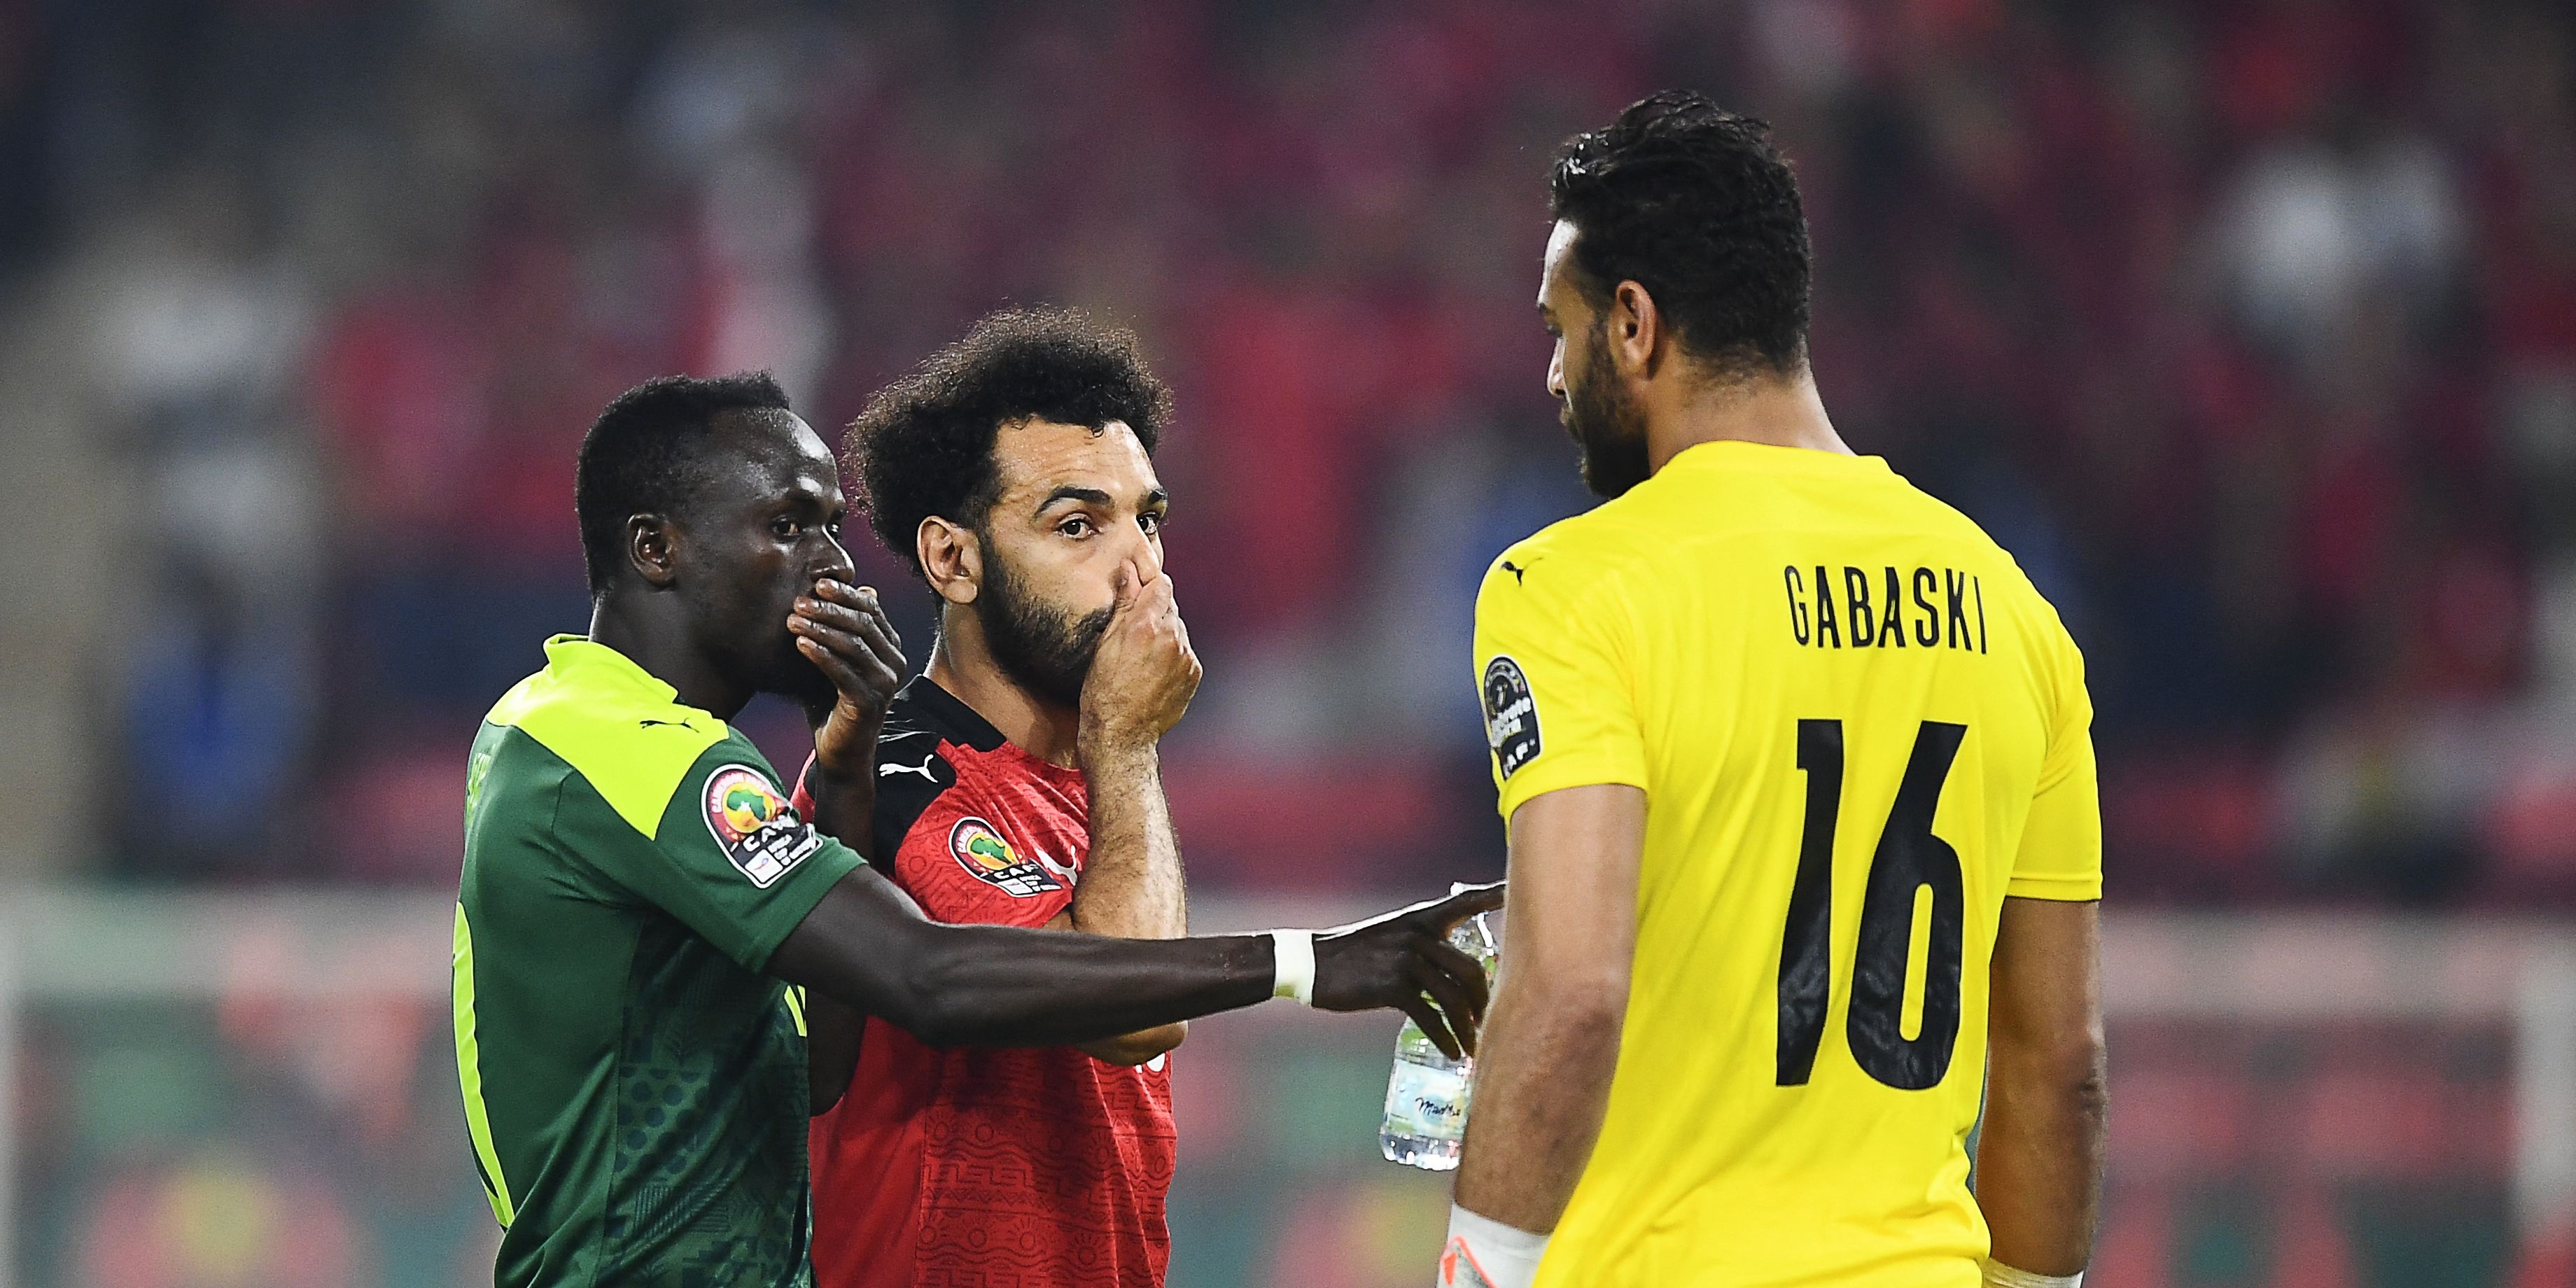 Sadio Mane and Mo Salah discuss who their childhood idols were as the Liverpool stars prepare to face eachother once again in World Cup Qualifier